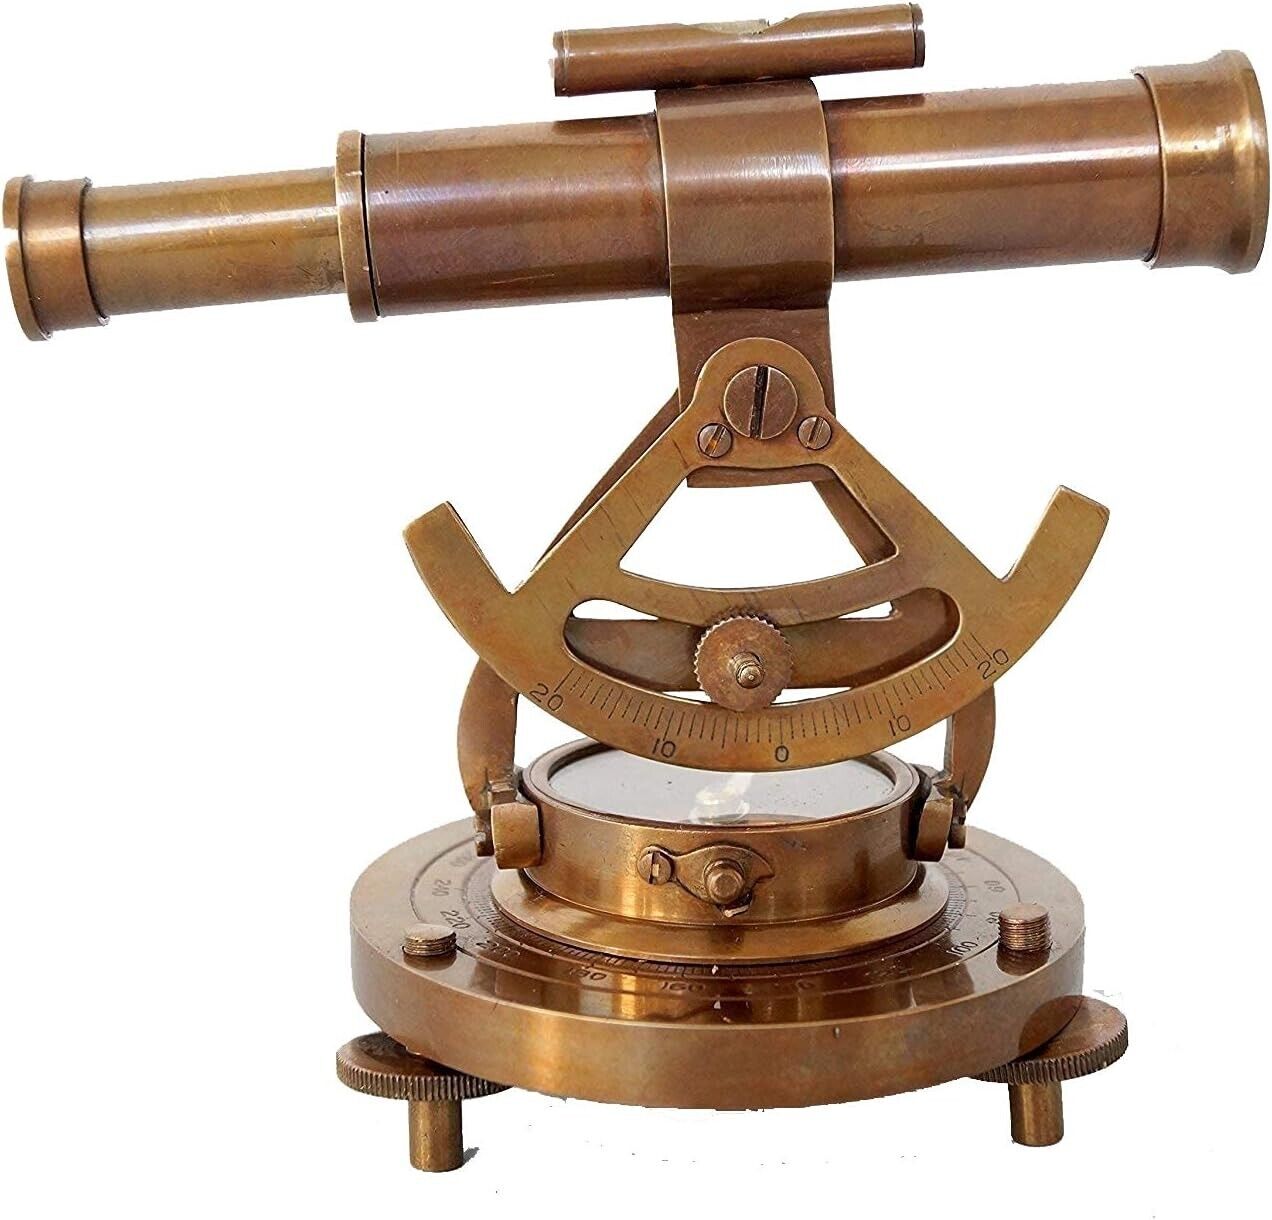 Telescope with Base Compass Gifts Brass Alidade Decorative